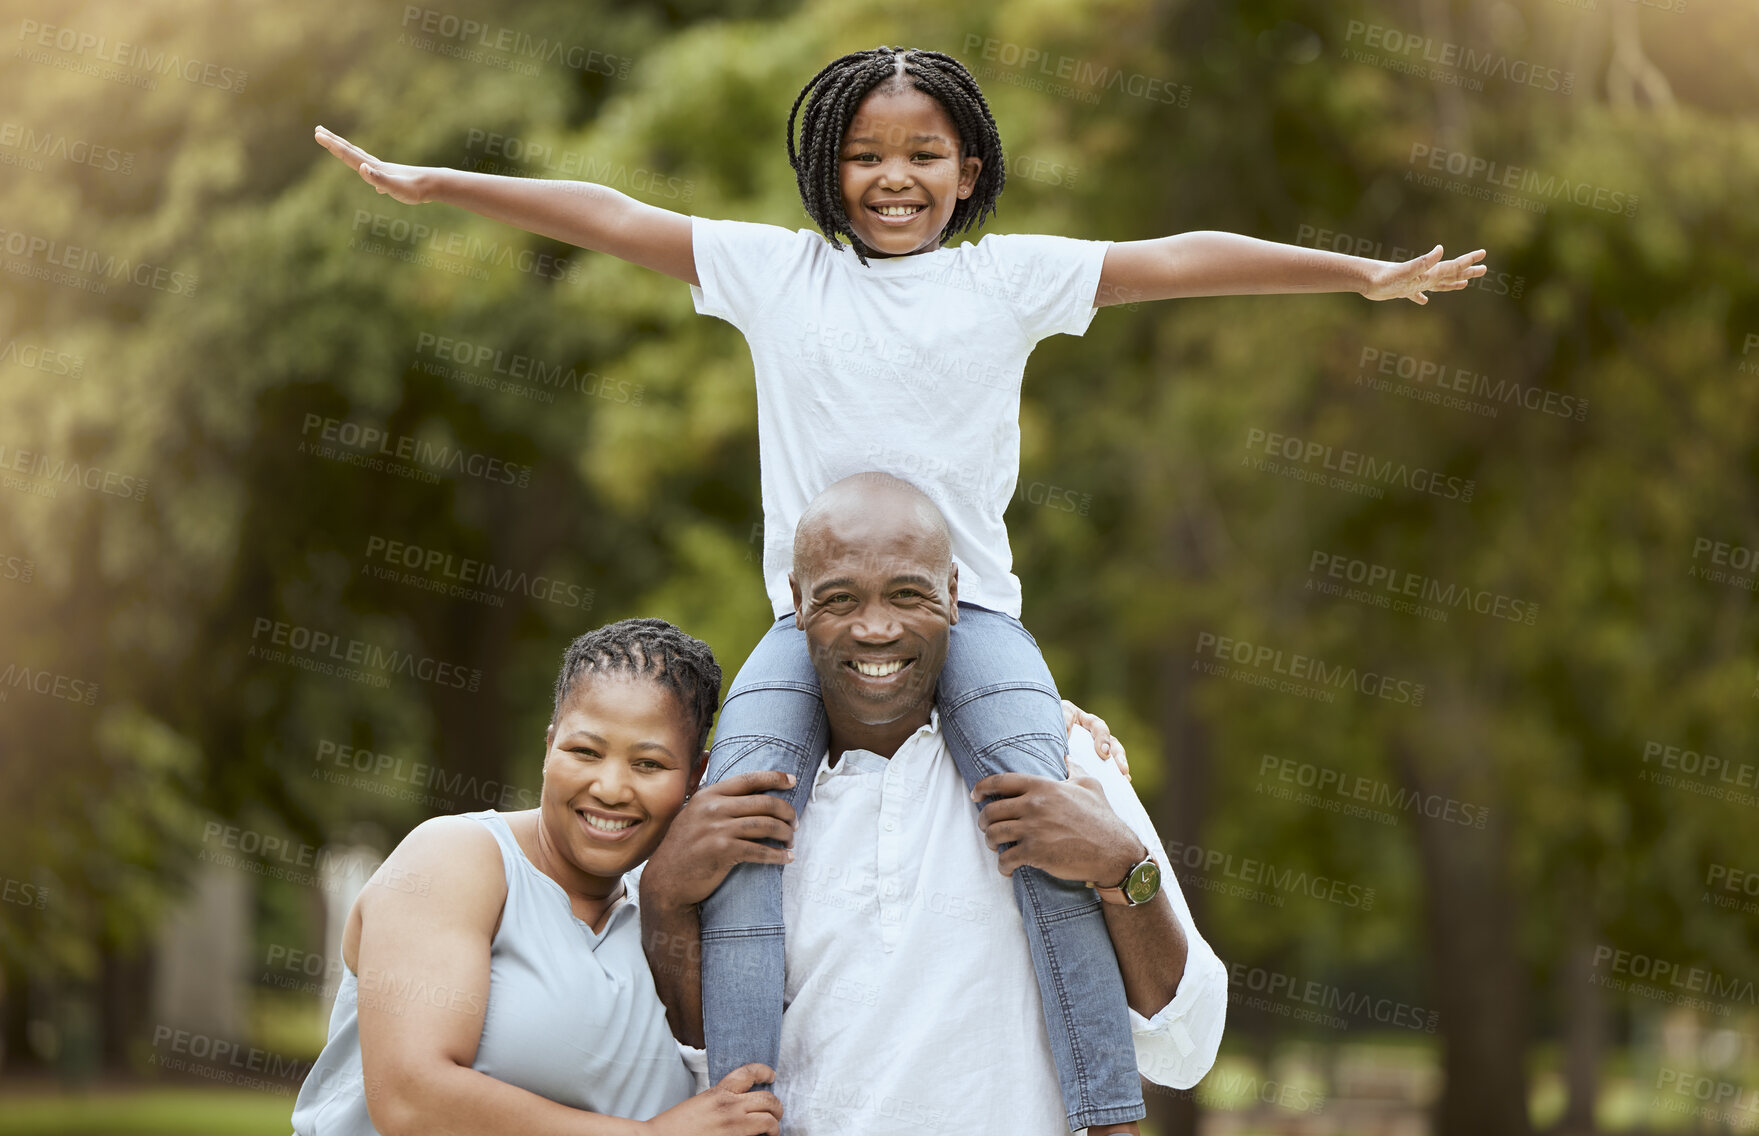 Buy stock photo Portrait of a happy black family in nature to relax bonding in freedom, wellness and peace together in a park. Mother, father and child loves flying, hugging or playing outdoors enjoying quality time